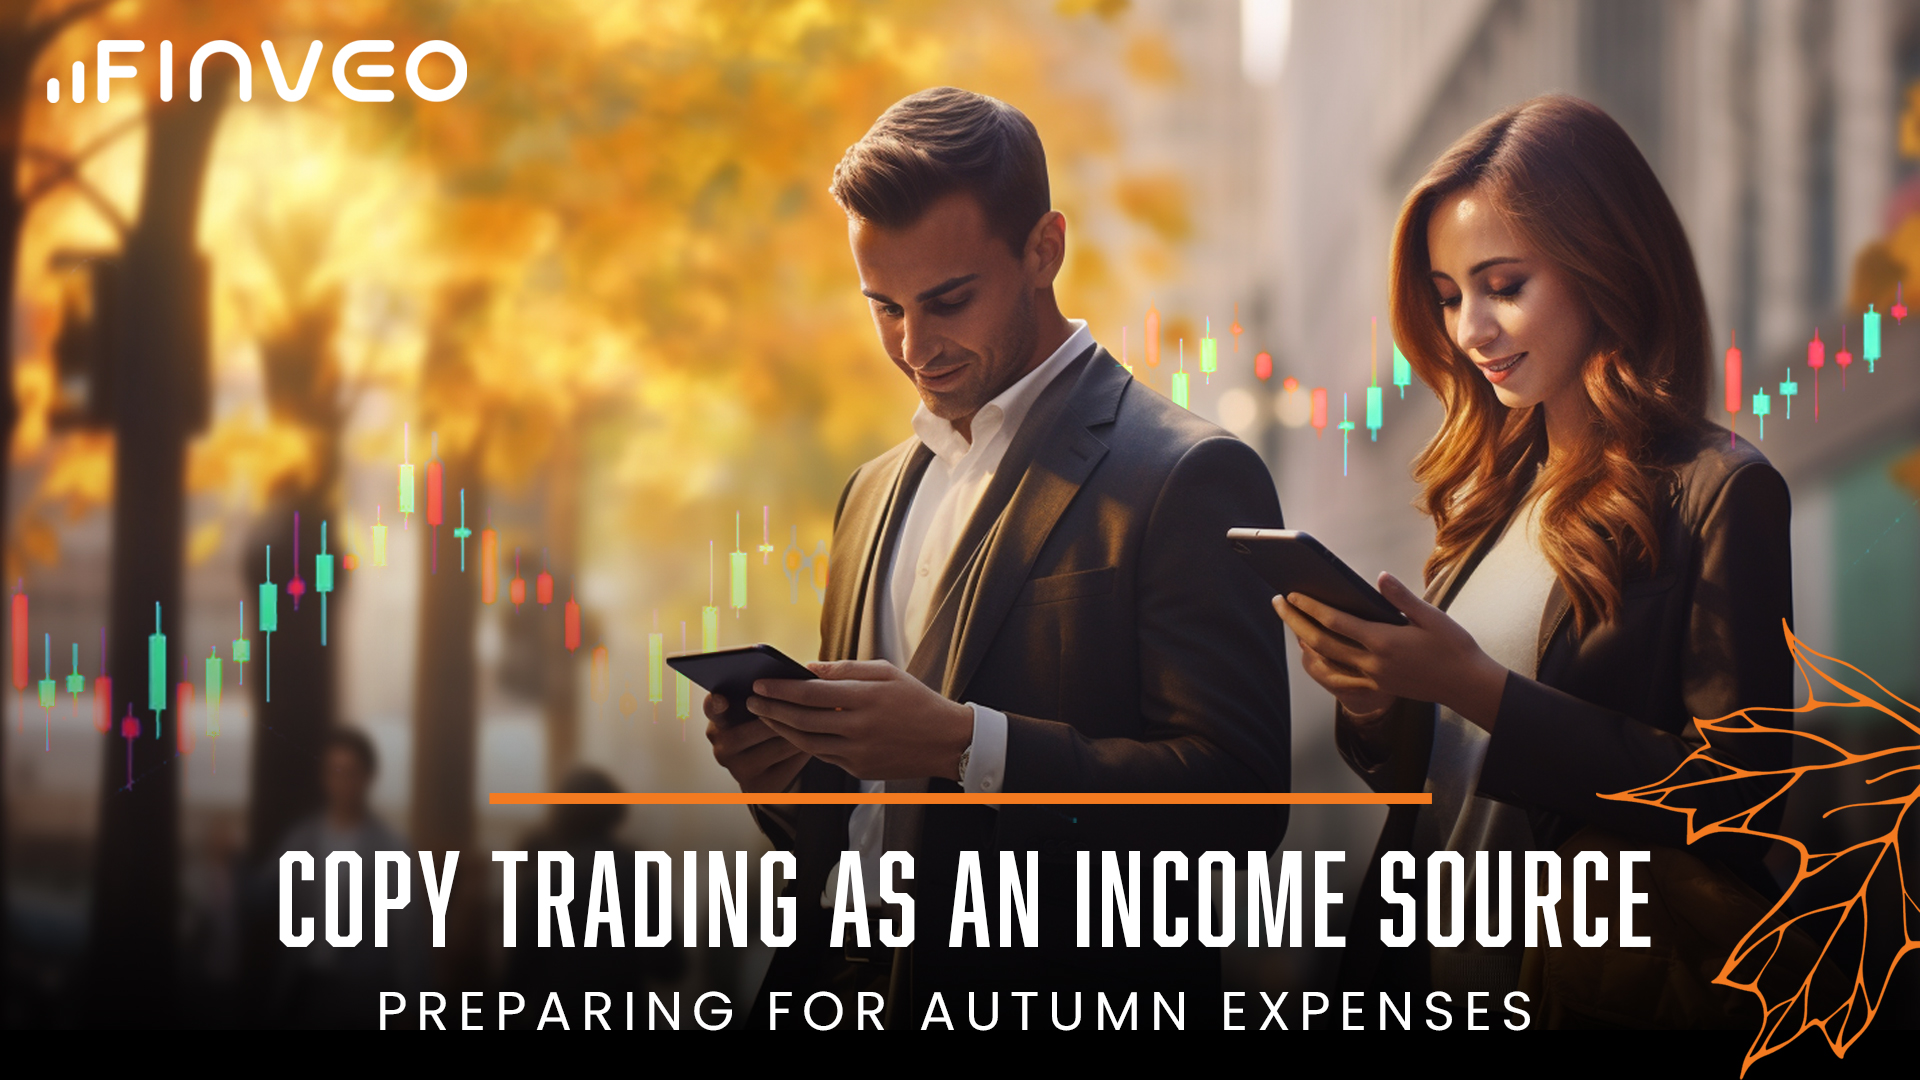 Copy Trading as a Seasonal Income Source: Preparing for Autumn Expenses